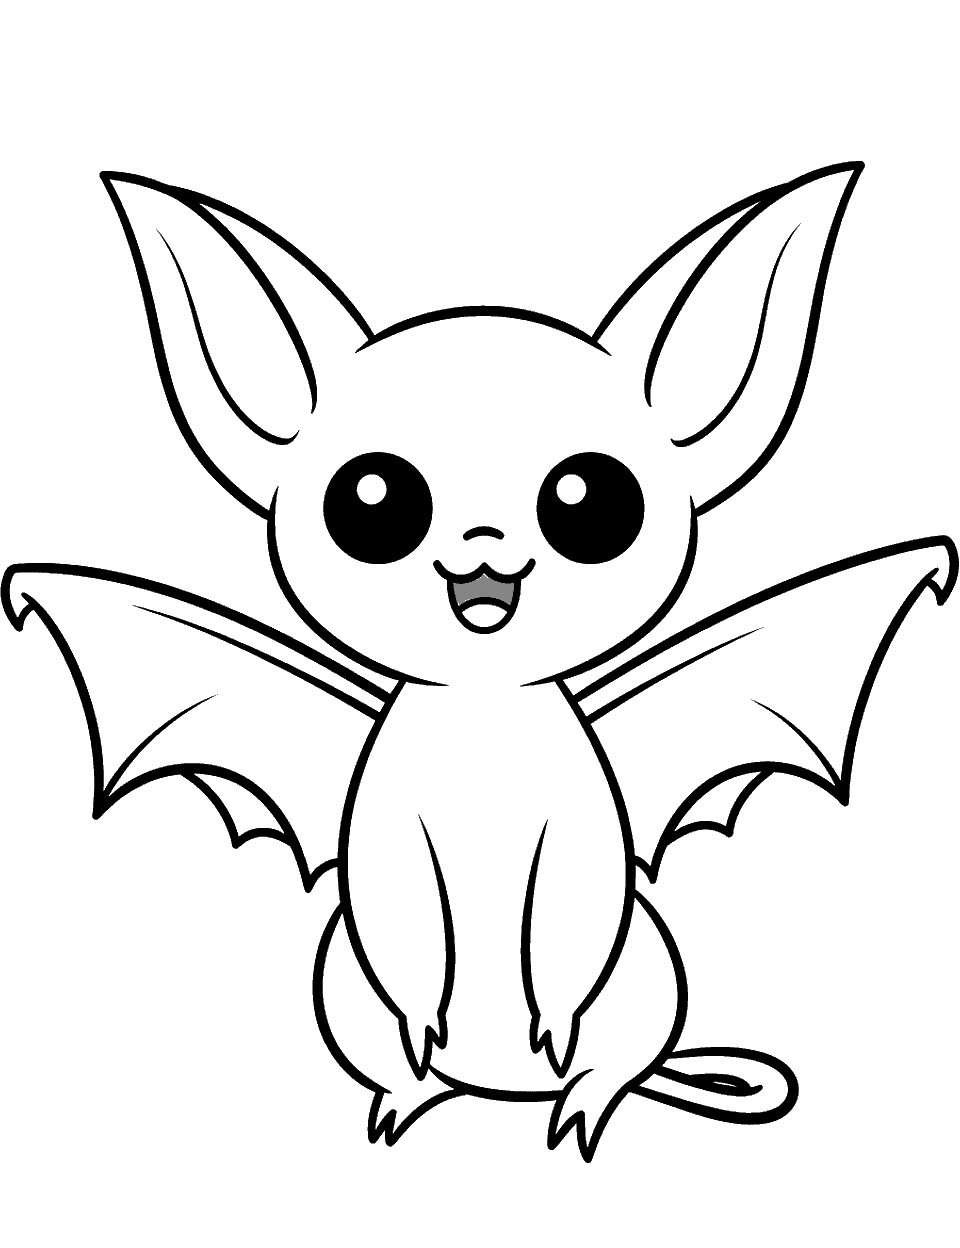 Simple Pokemon Bat Outline Coloring Page - An easy-to-color outline of a Pokemon-inspired style bat, perfect for young children.